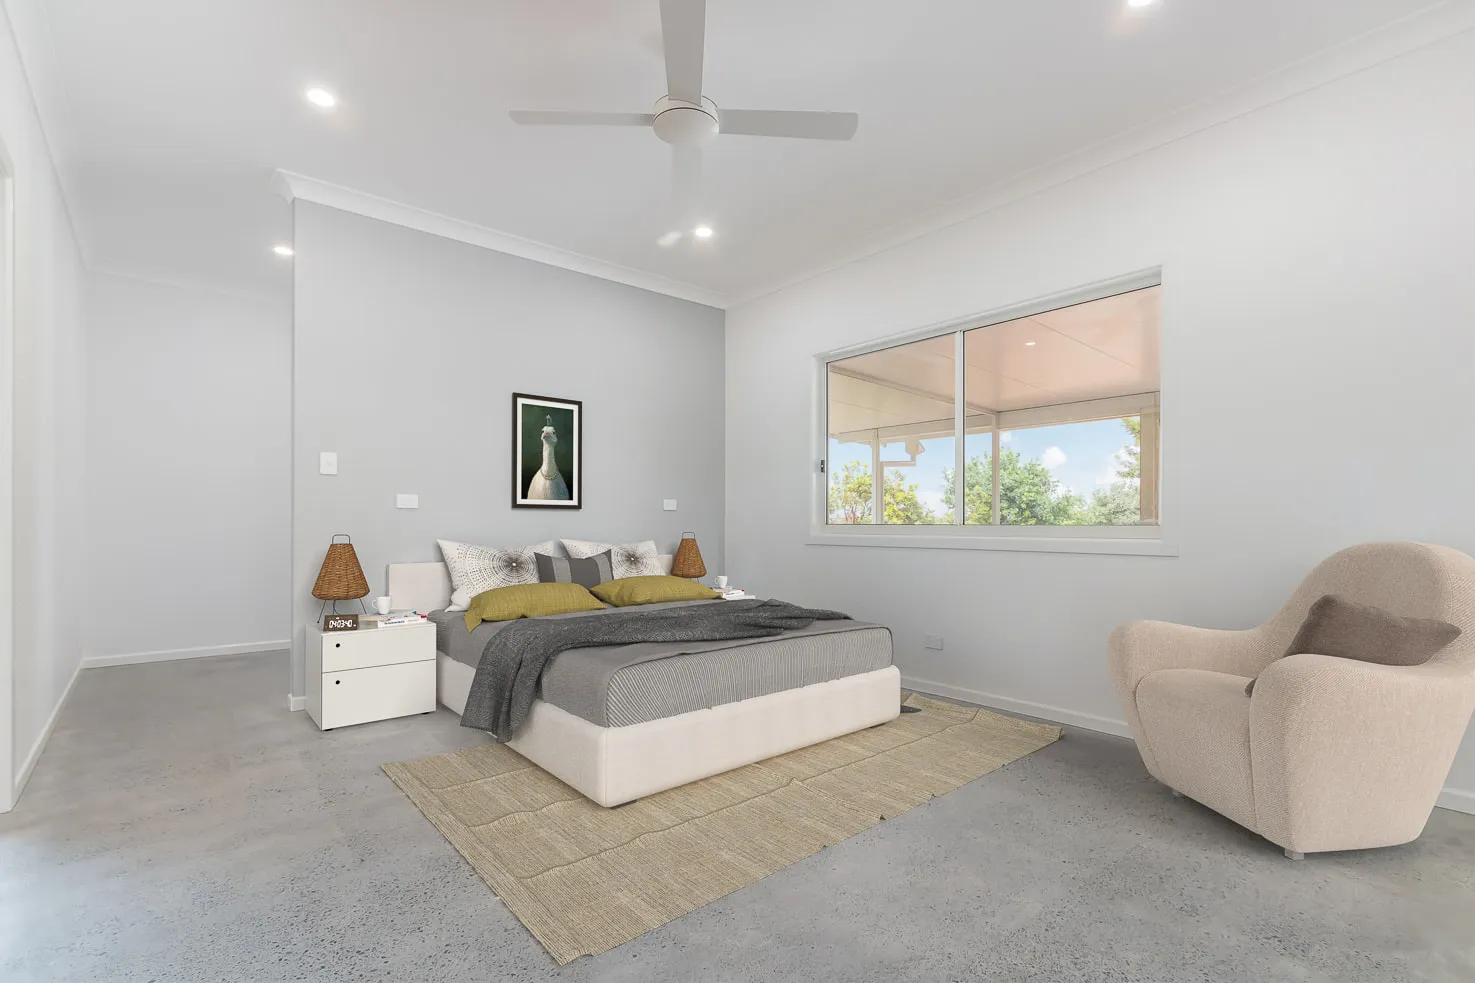 Bedroom with polished concrete floors